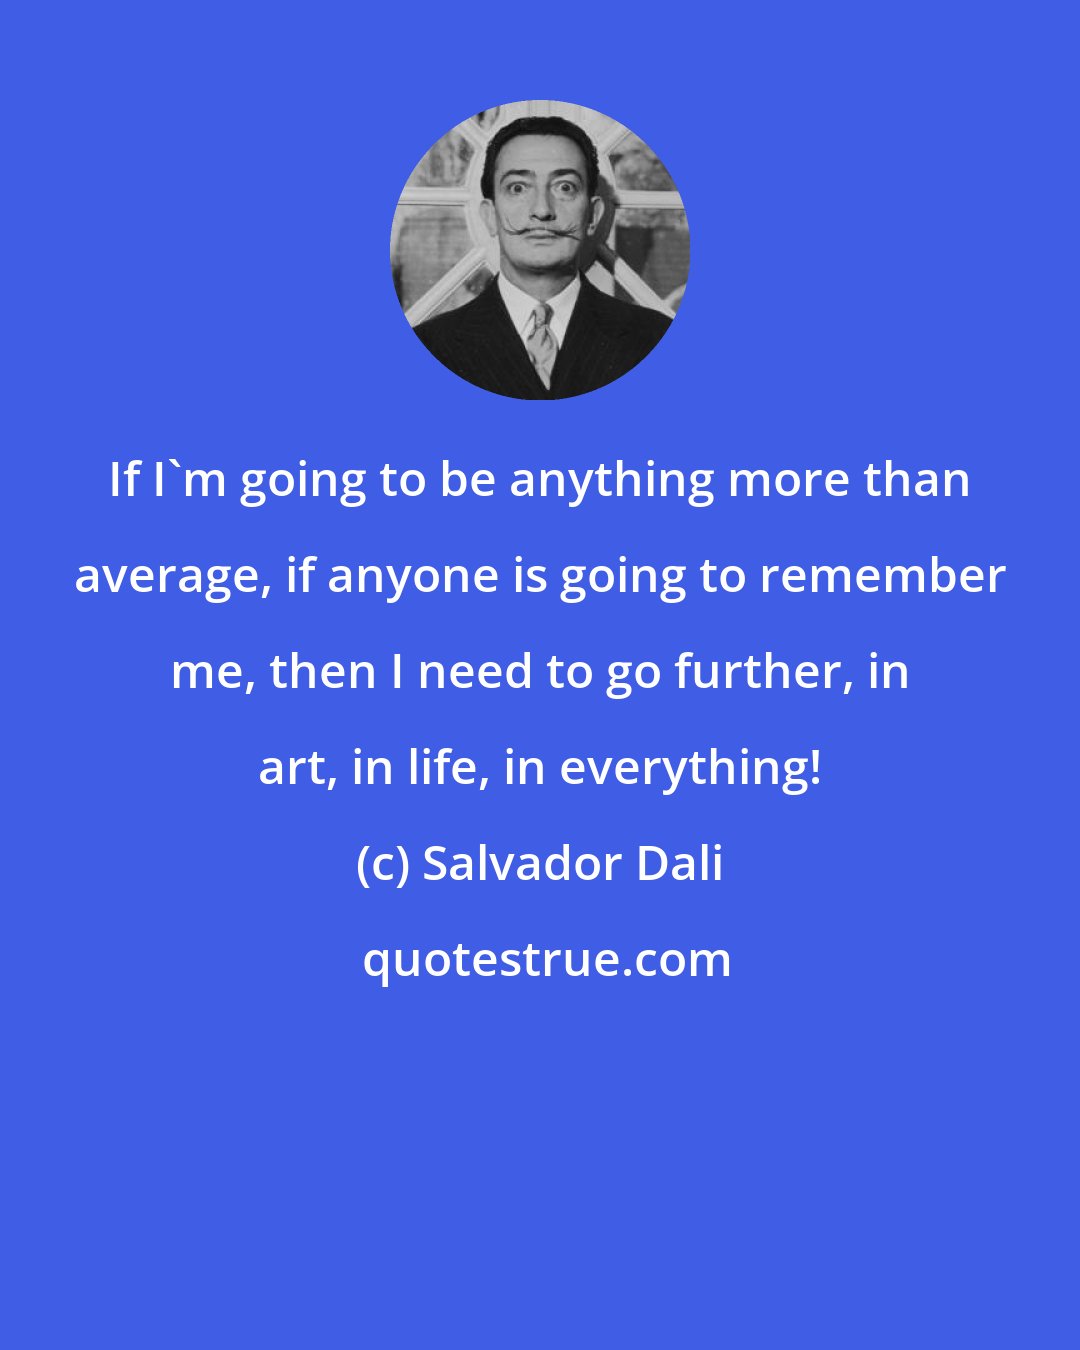 Salvador Dali: If I'm going to be anything more than average, if anyone is going to remember me, then I need to go further, in art, in life, in everything!